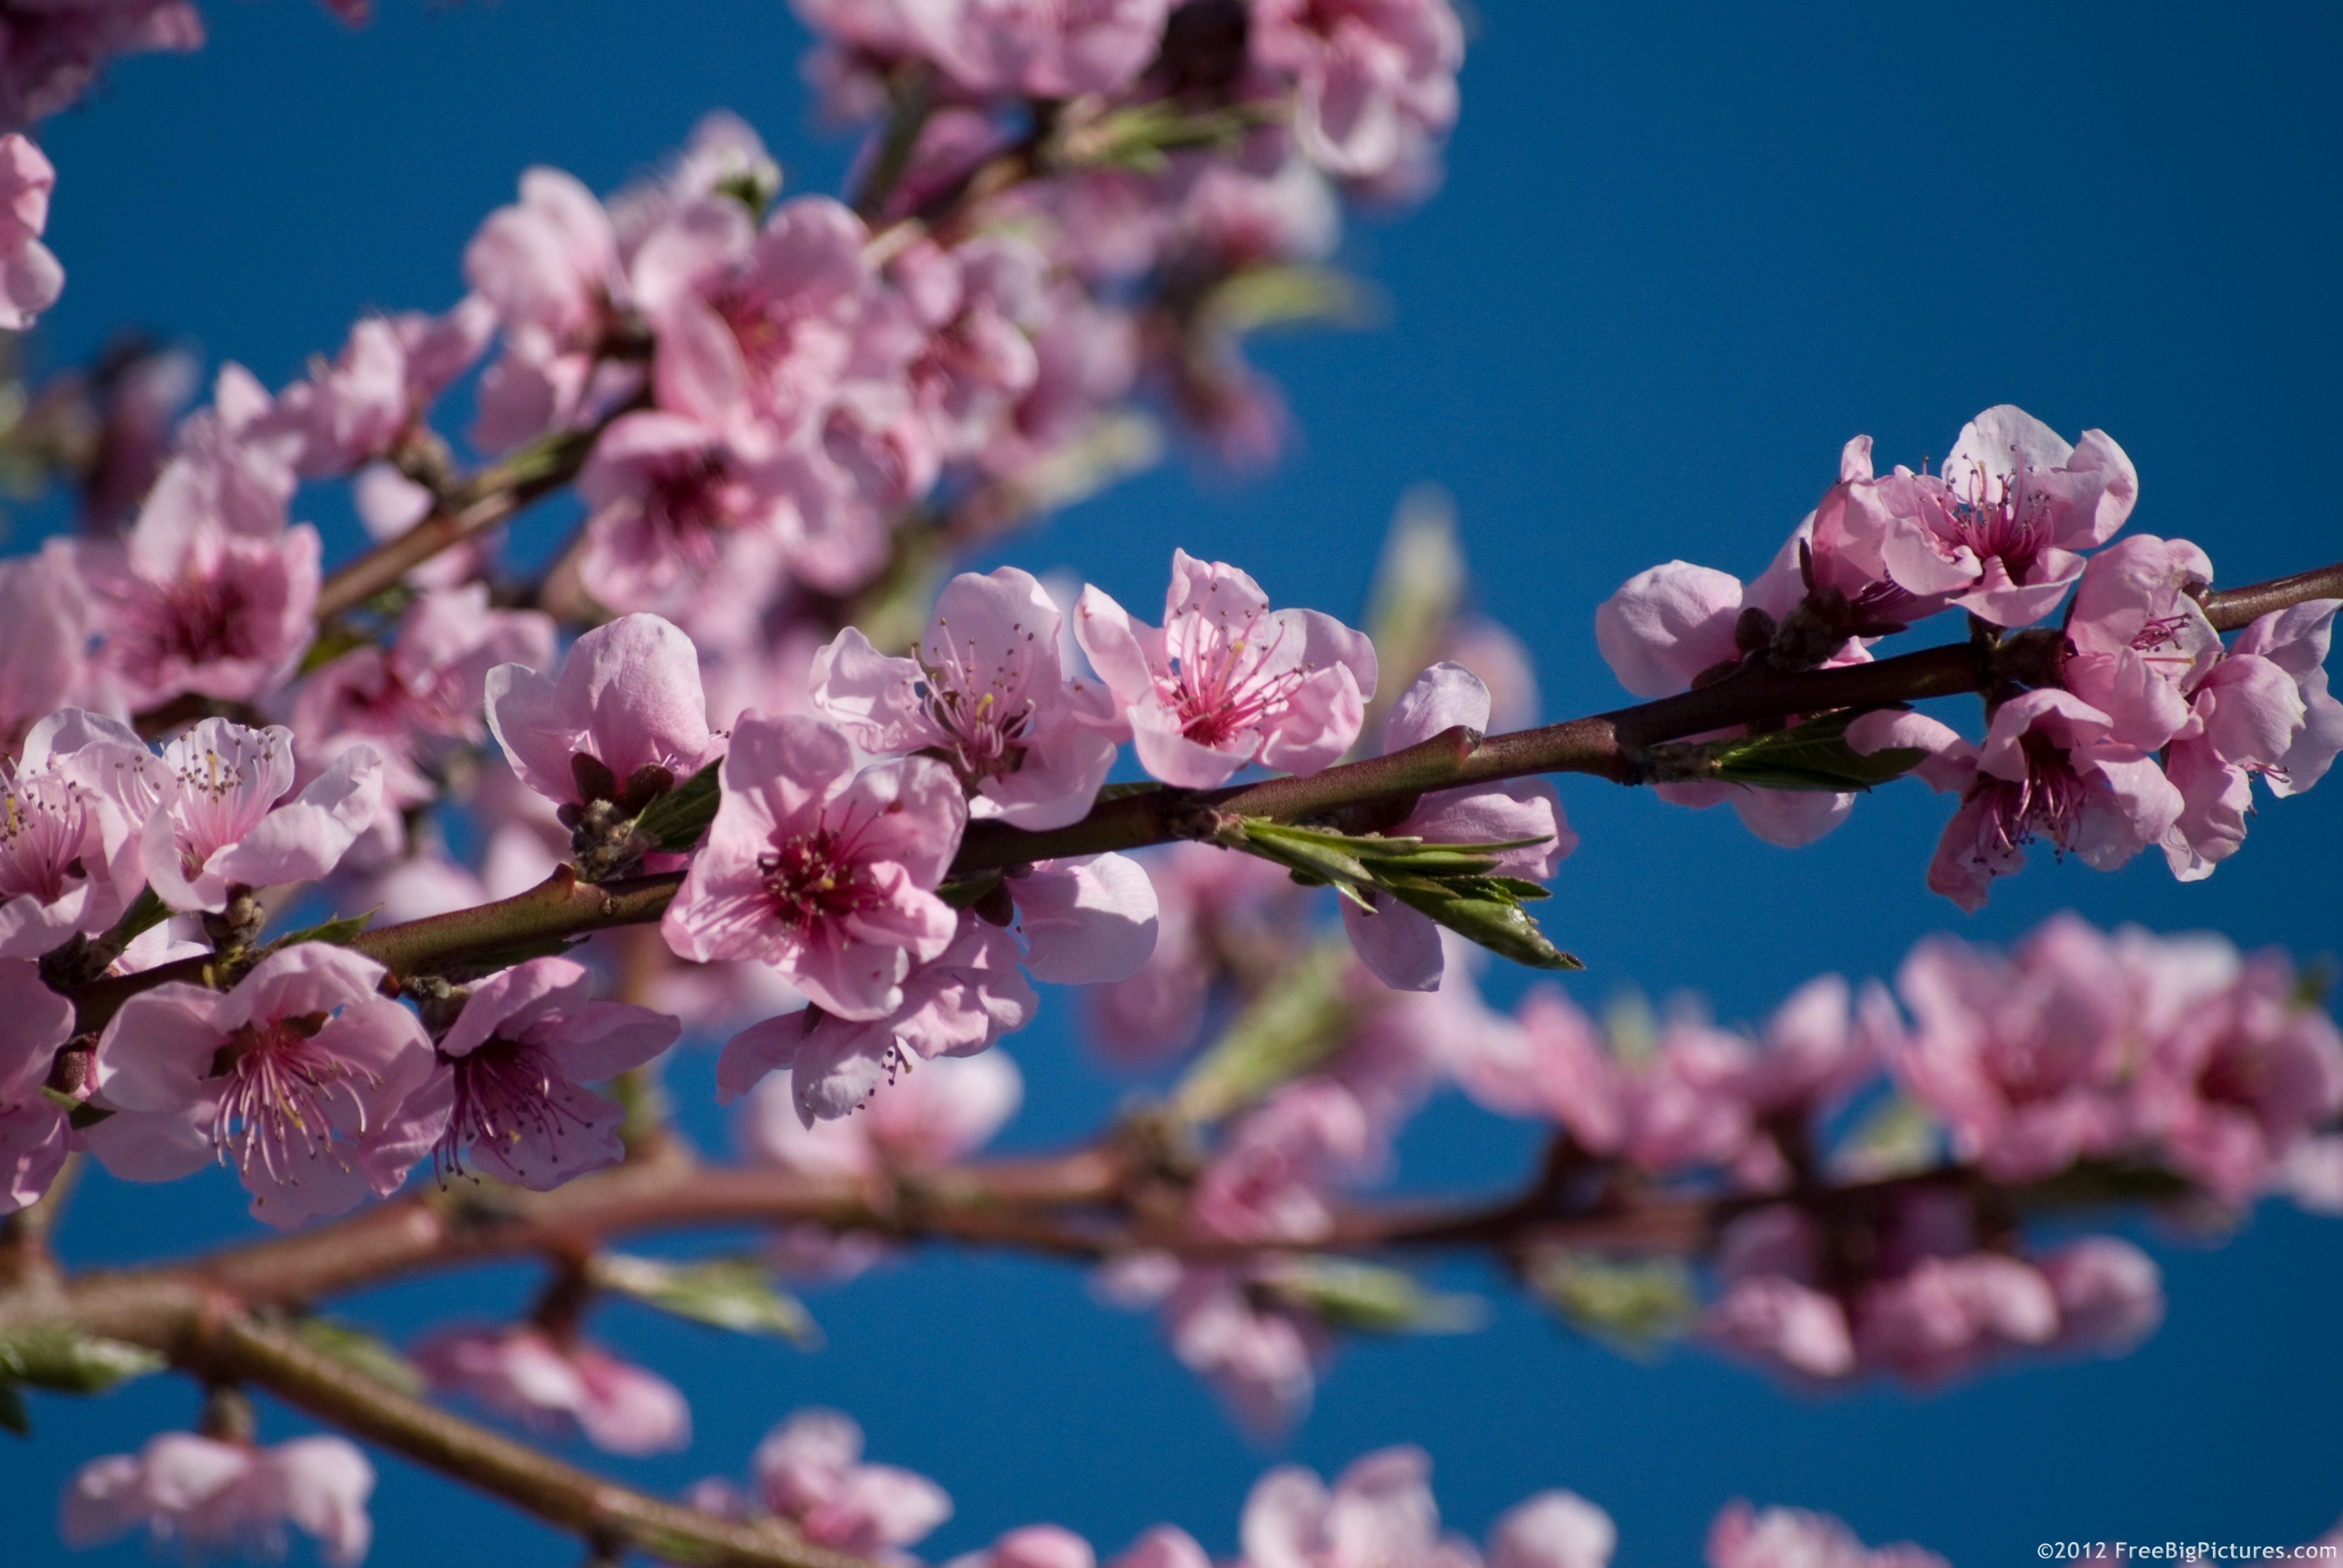 Branch with flowers of peach and a delightful sky, in blue